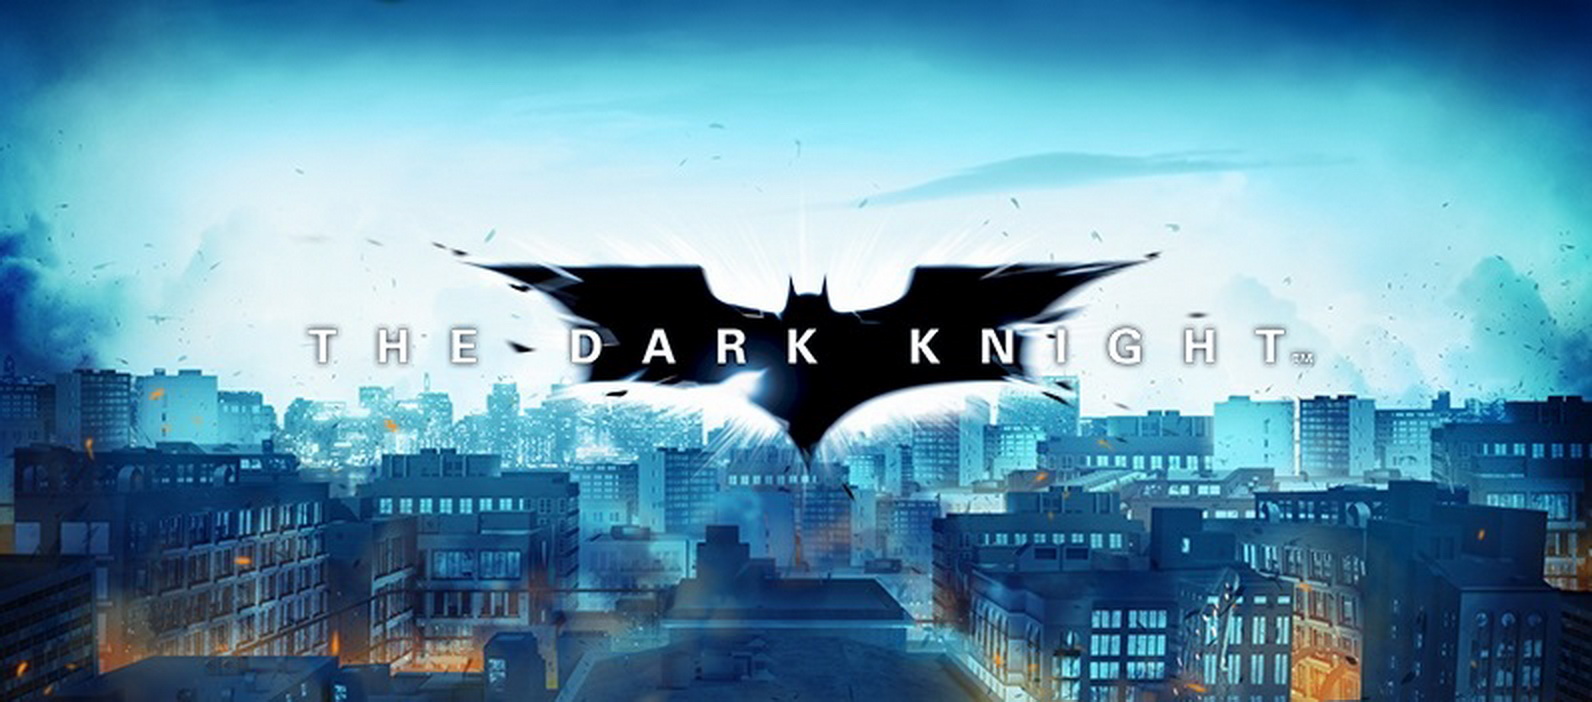 The The Dark Knight Online Slot Demo Game by Playtech